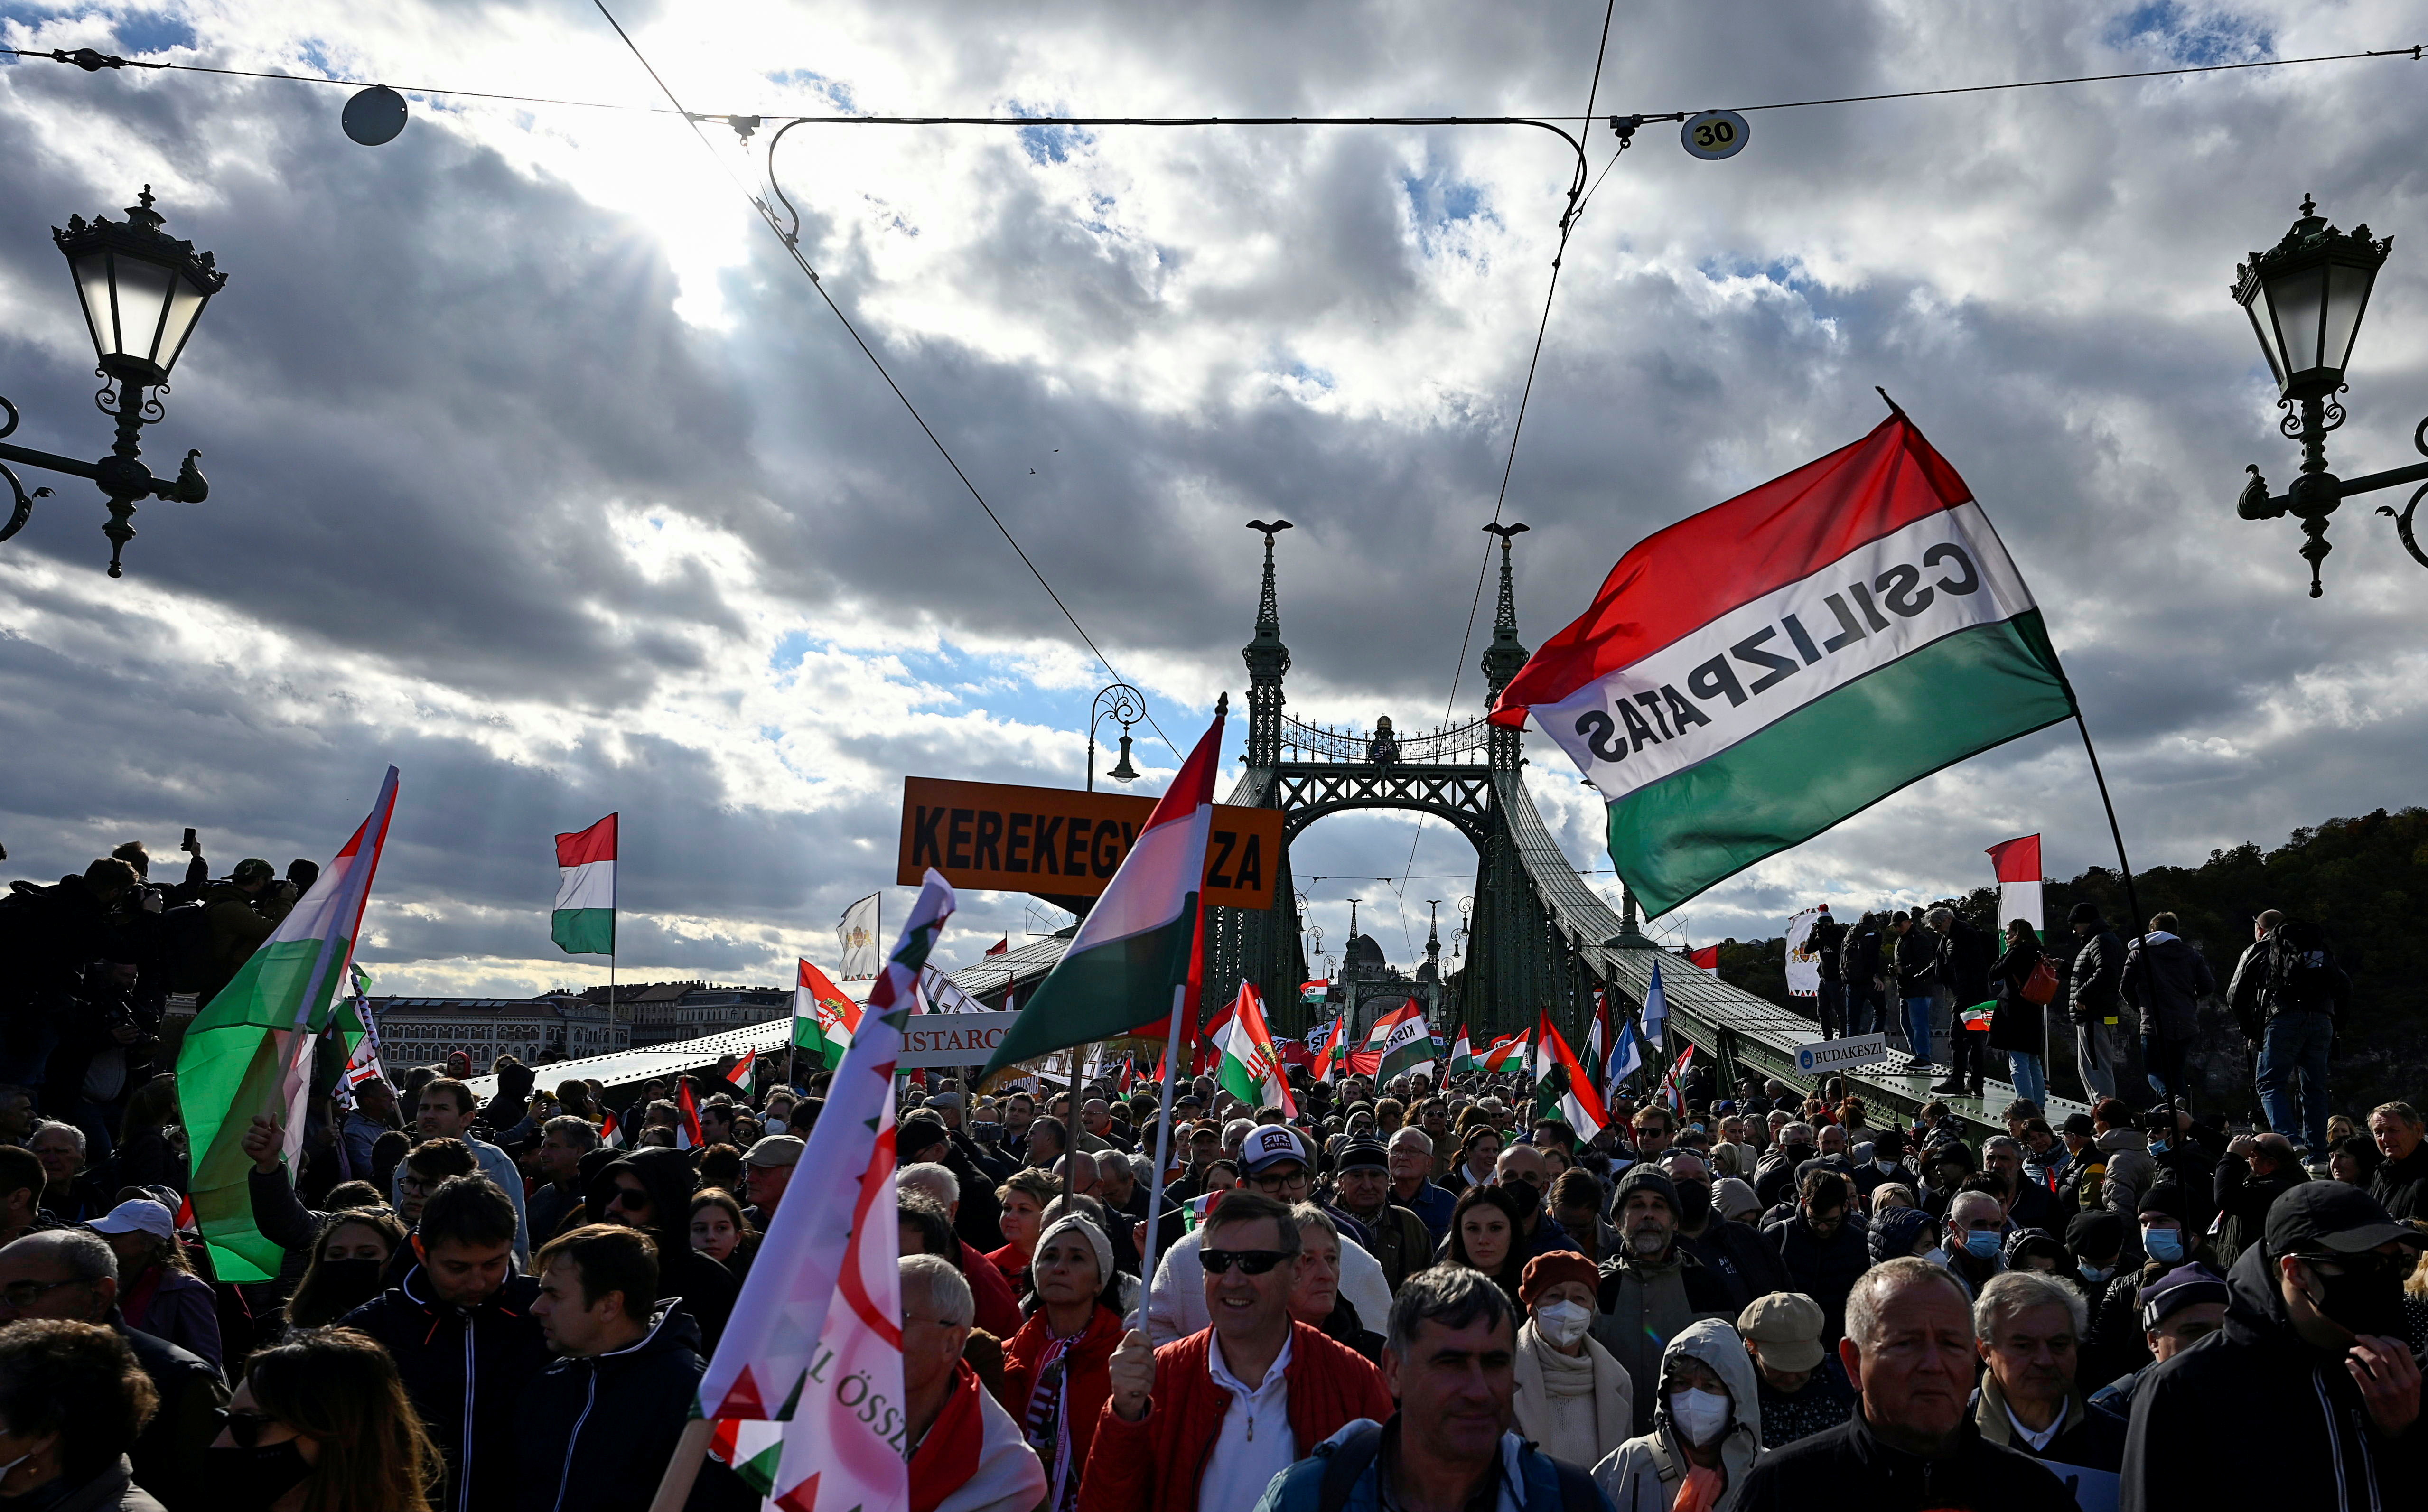 Pro-Orban rally on anniversary of Hungarian uprising, in Budapest